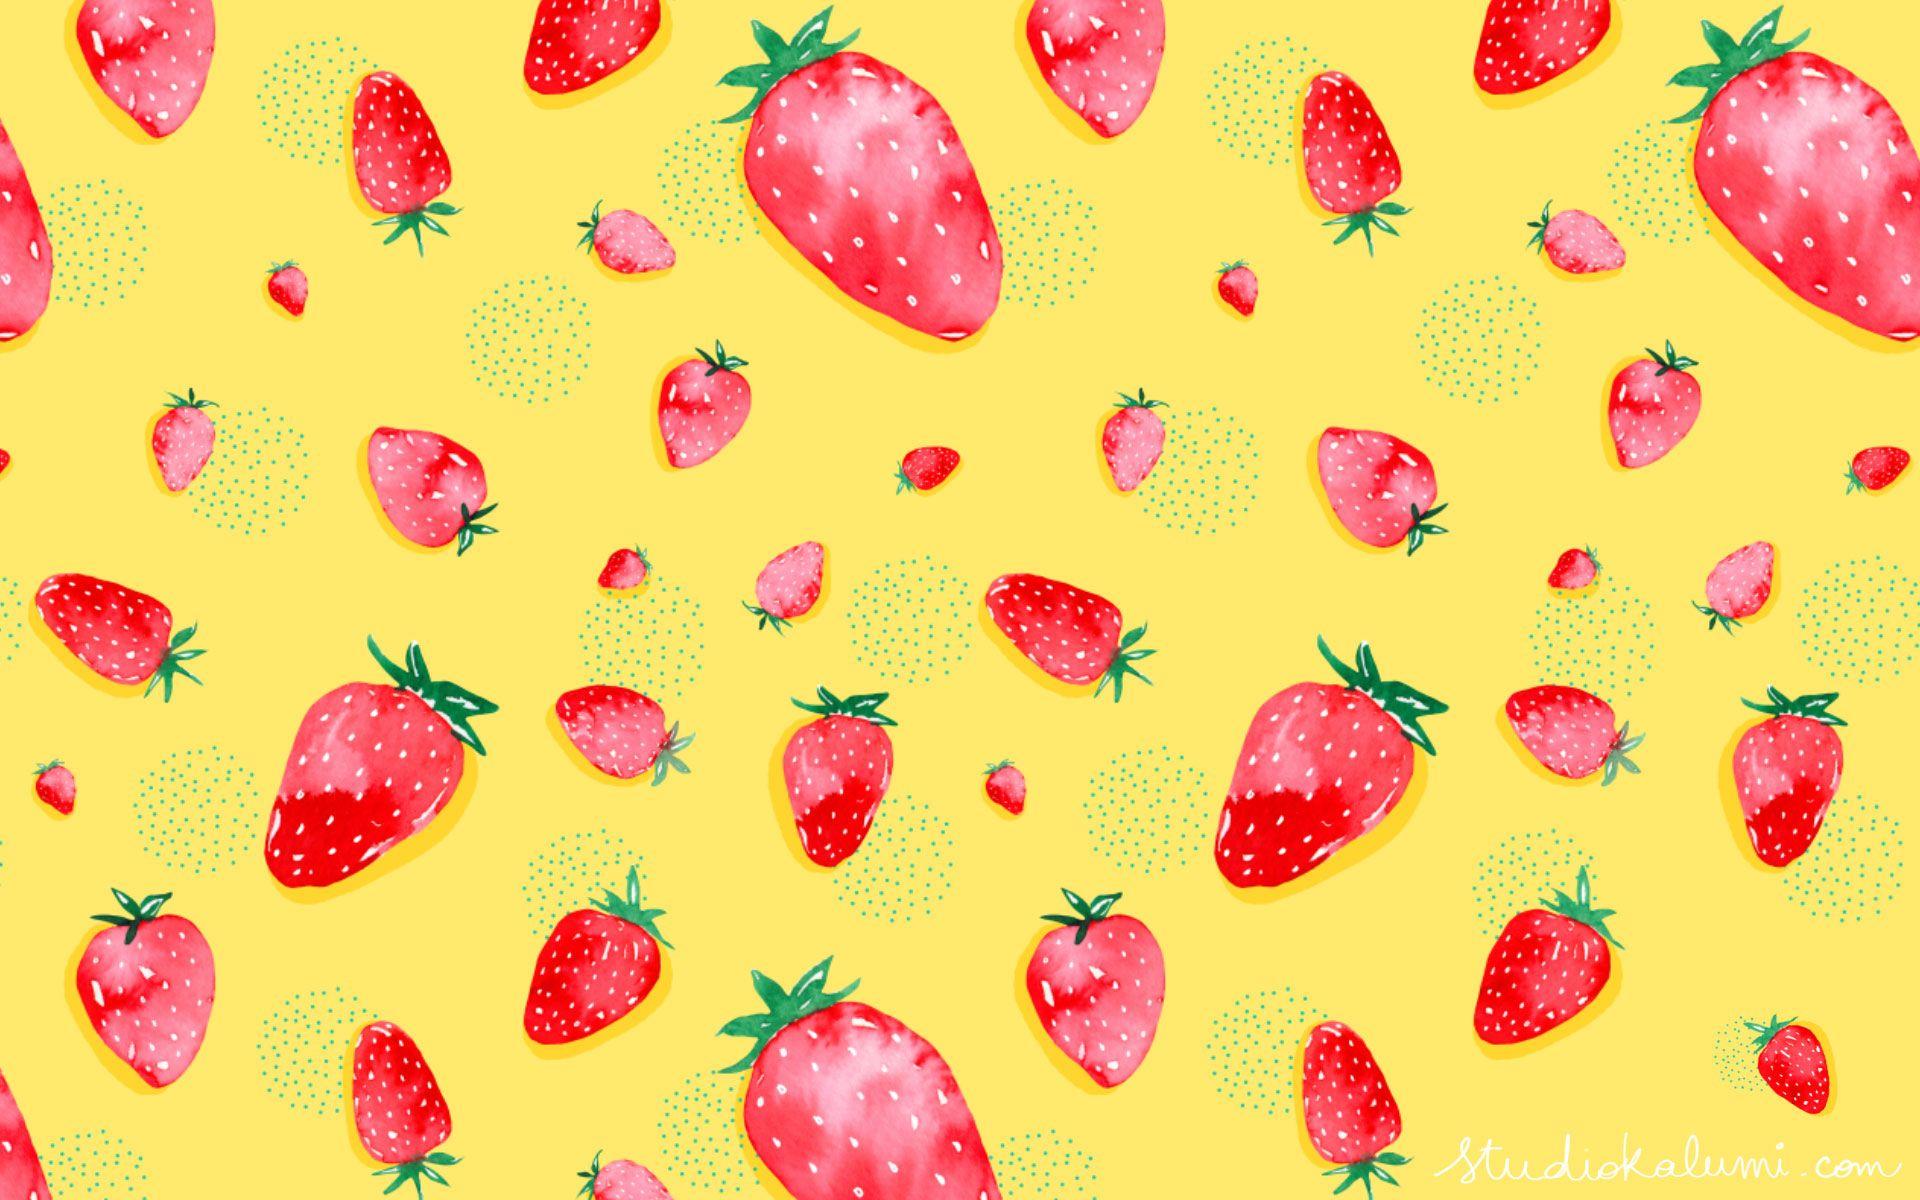 Downloads Made With Love And Watercolor Strawberry Field Desktop